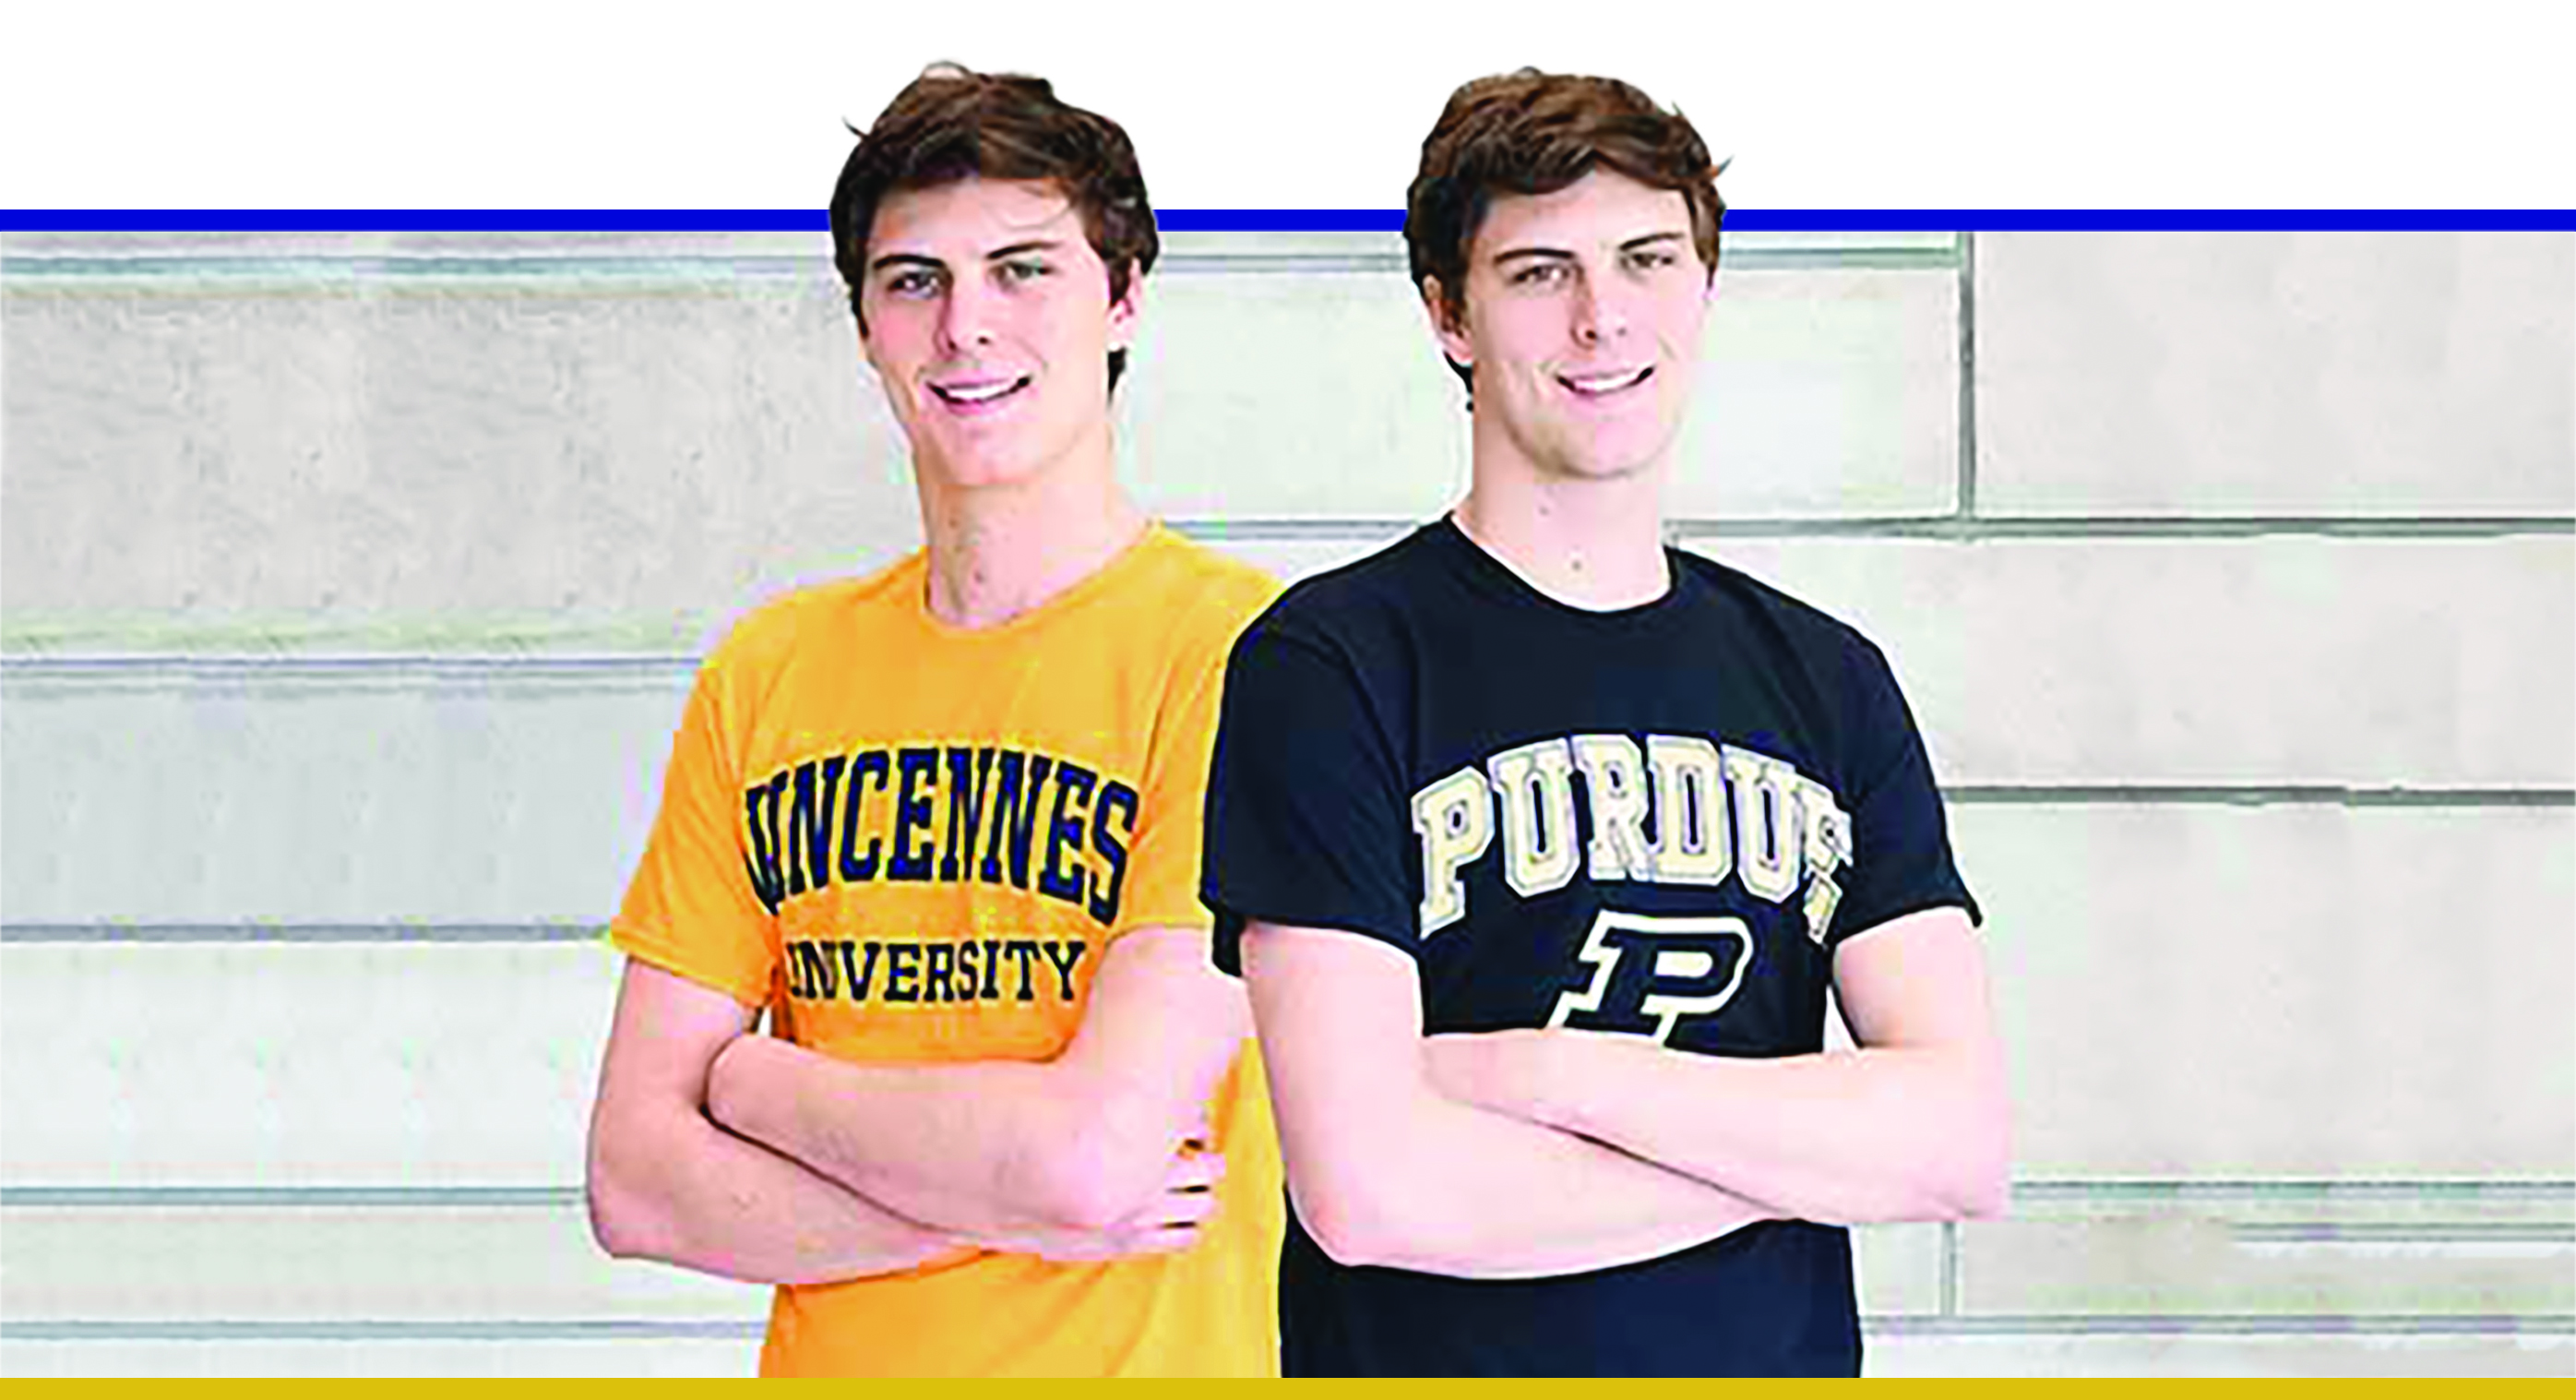 Student in Vincennes University gear and Purdue University Gear